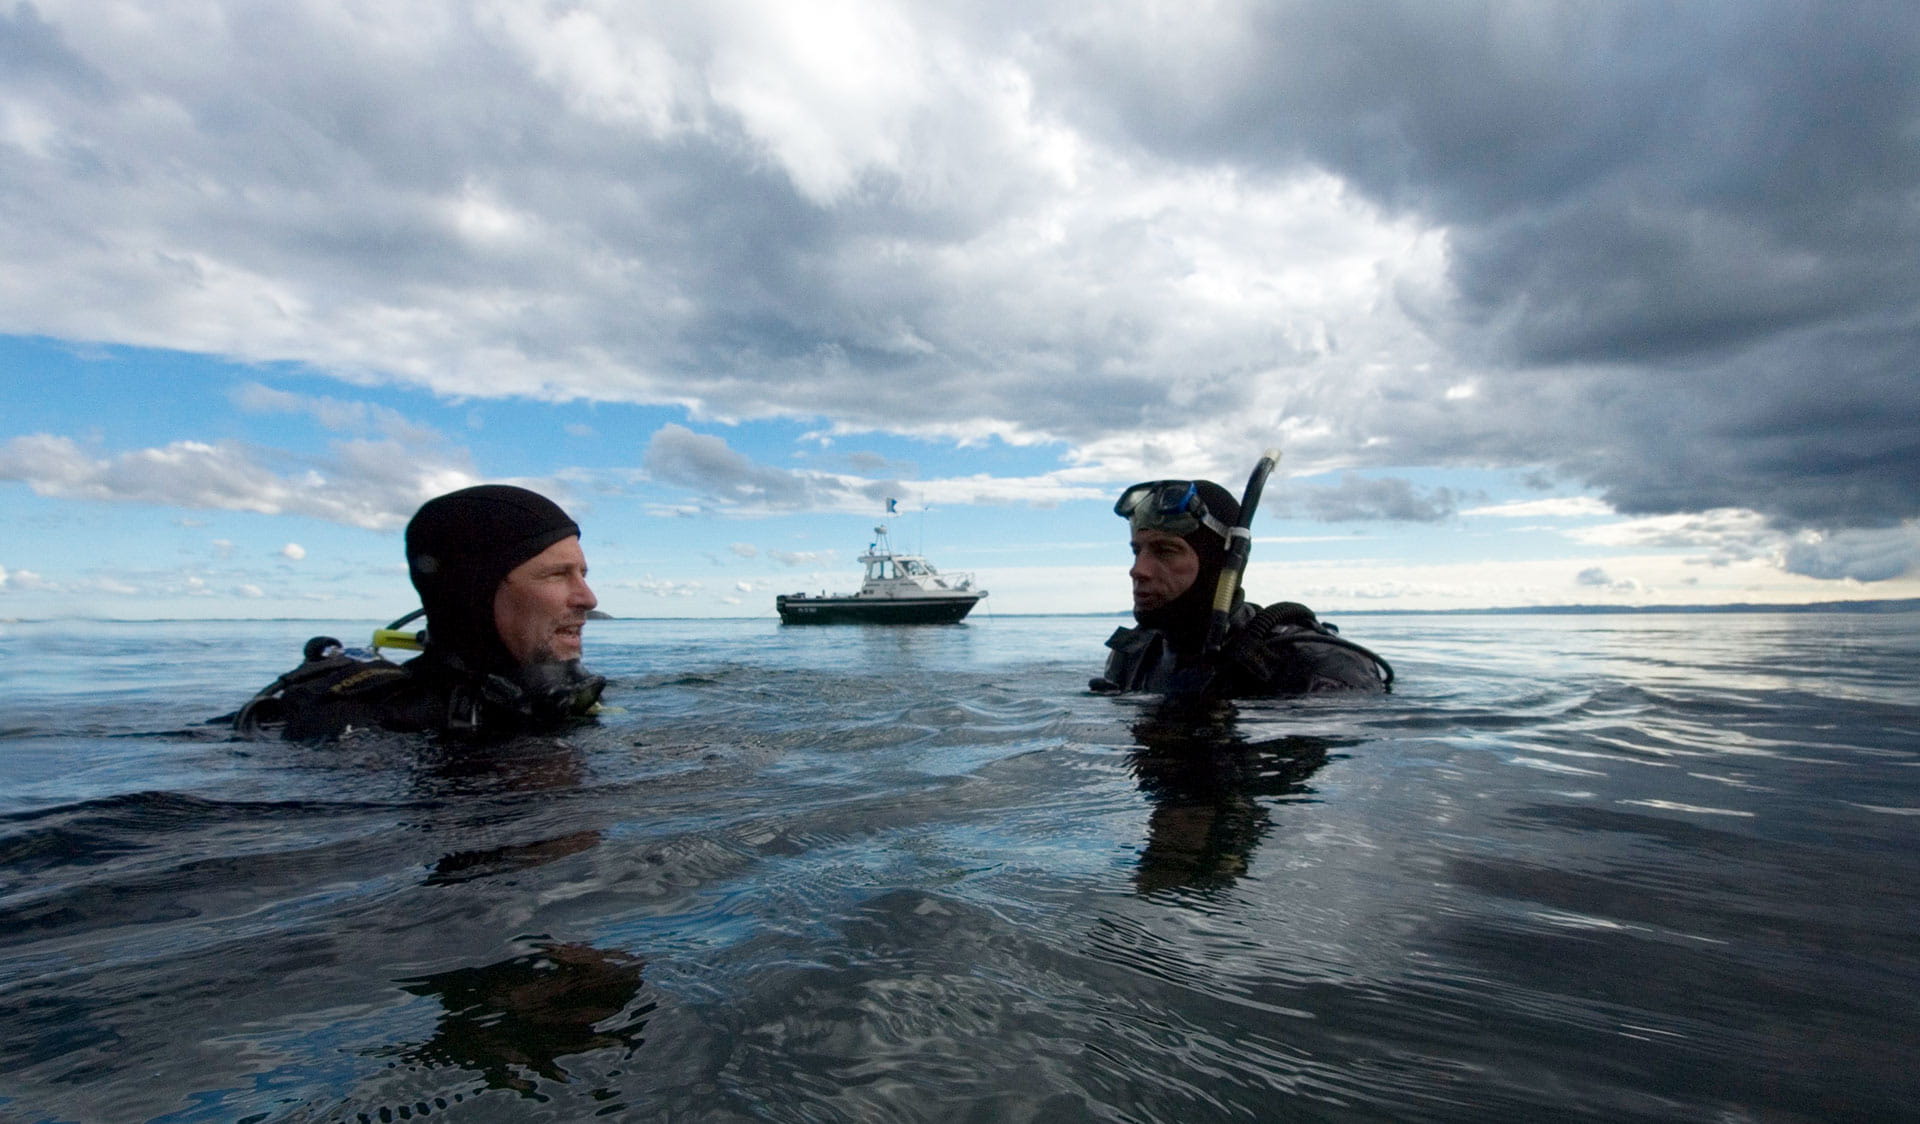 Two male divers return to the water's surface during their dive with their boat in the background of the shot.